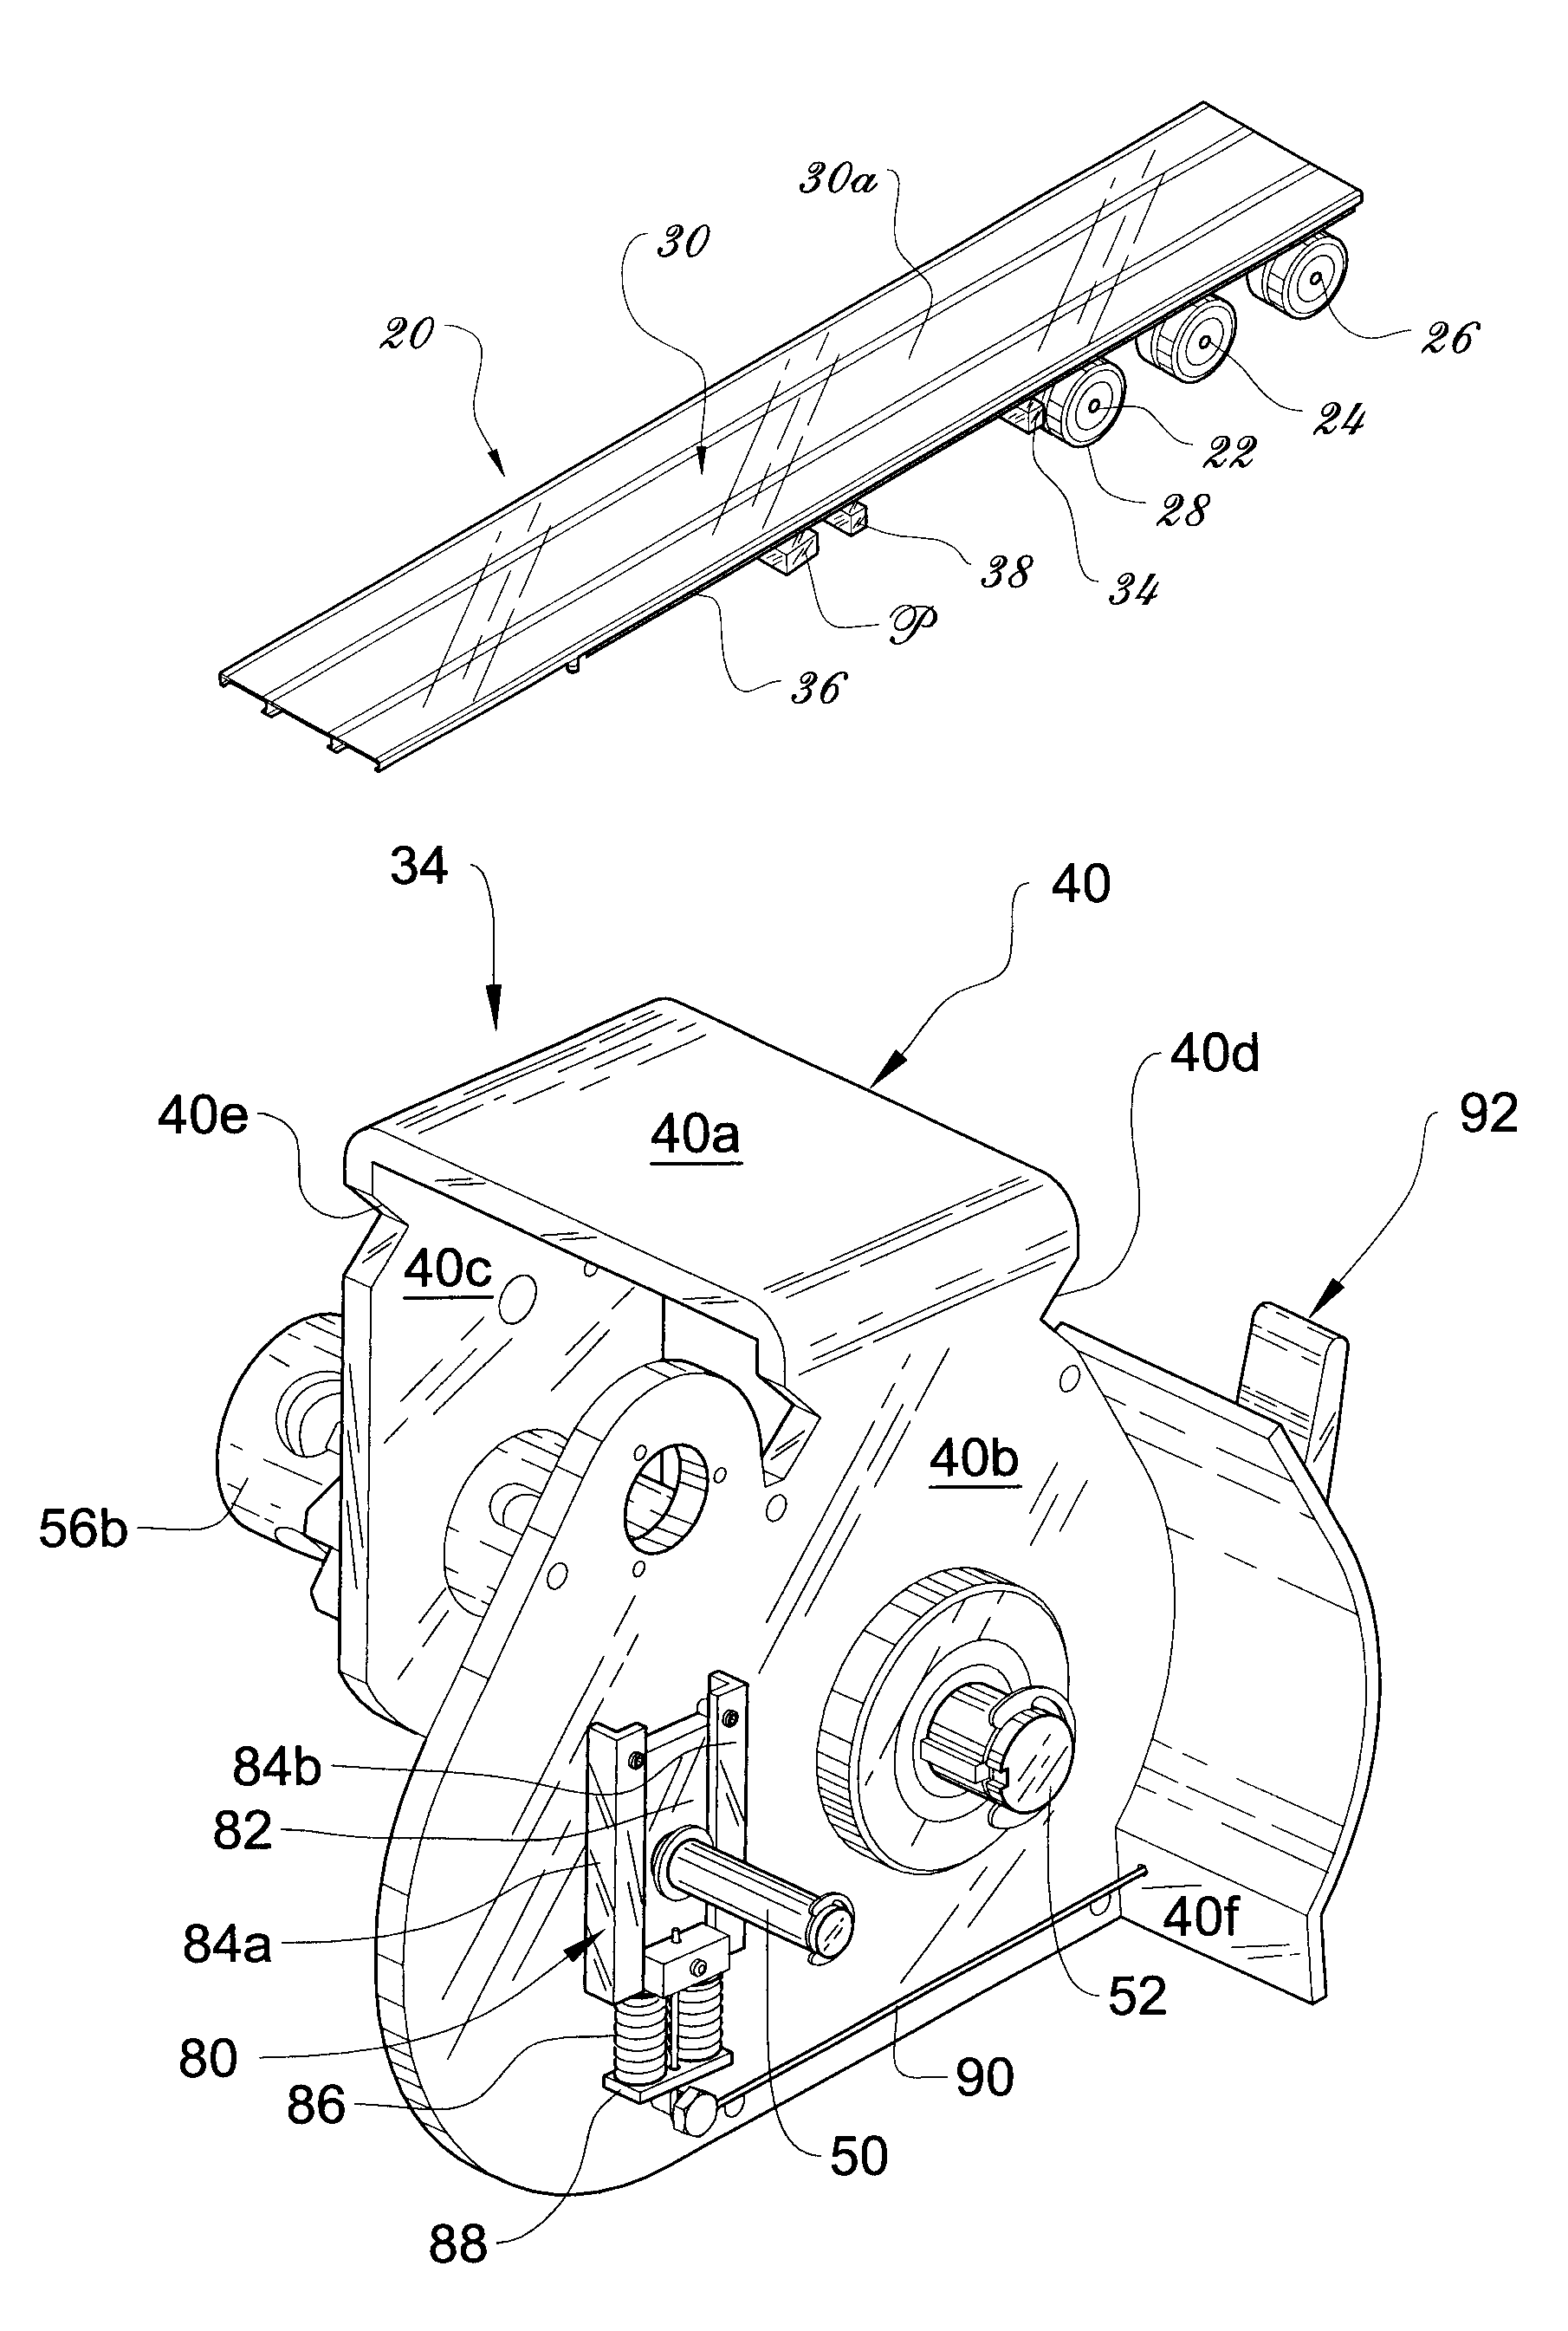 Clutch controled load-securing strap tensioning system for trailer